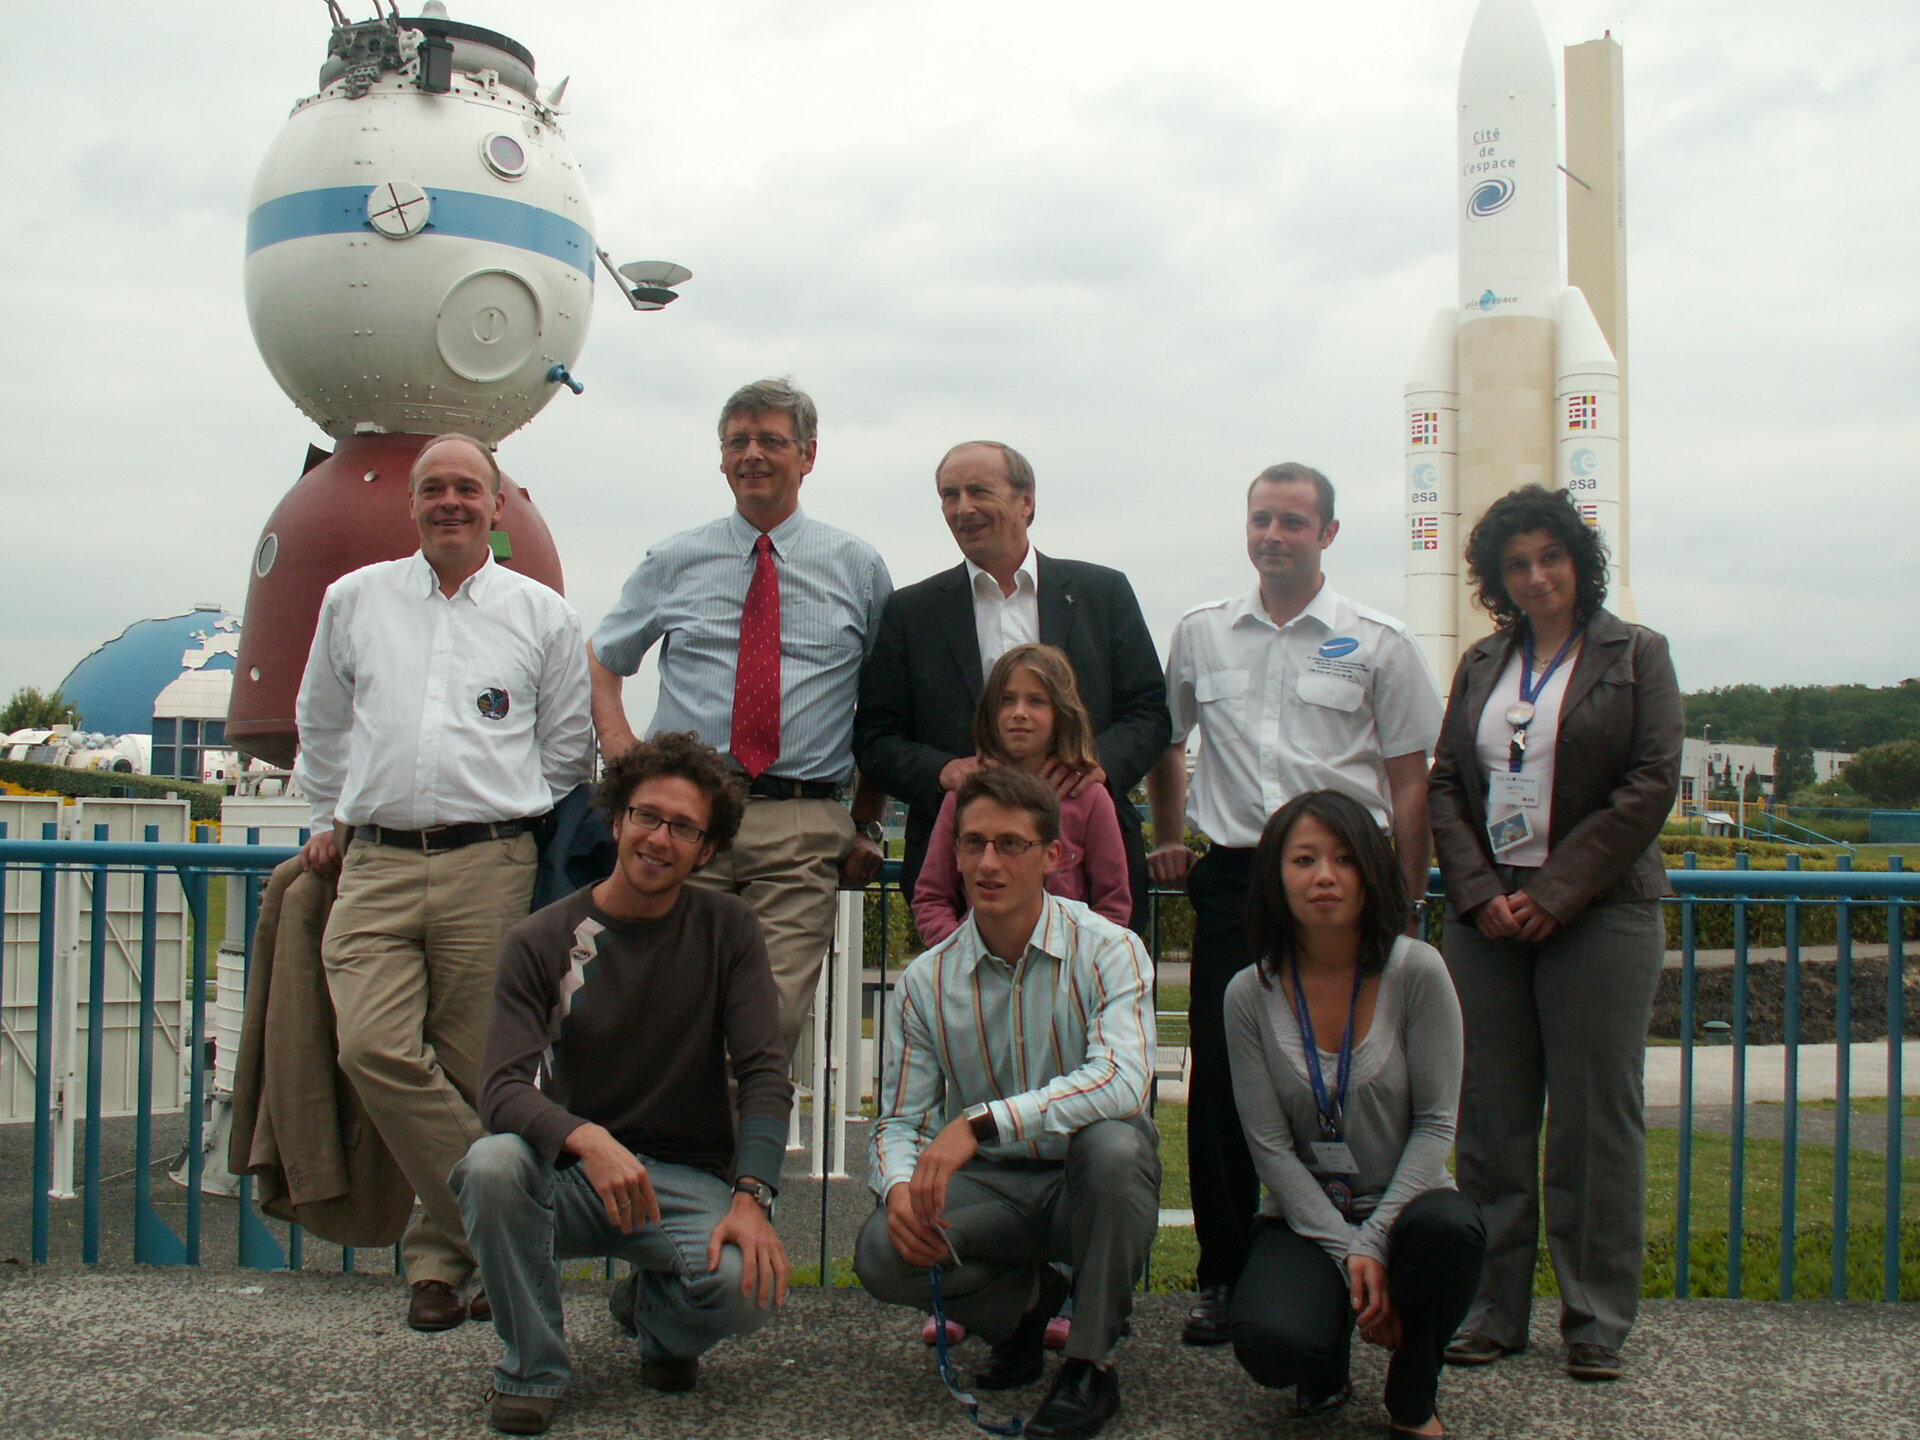 JJ Favier and JP Haigneré with would-be astronaut candidates